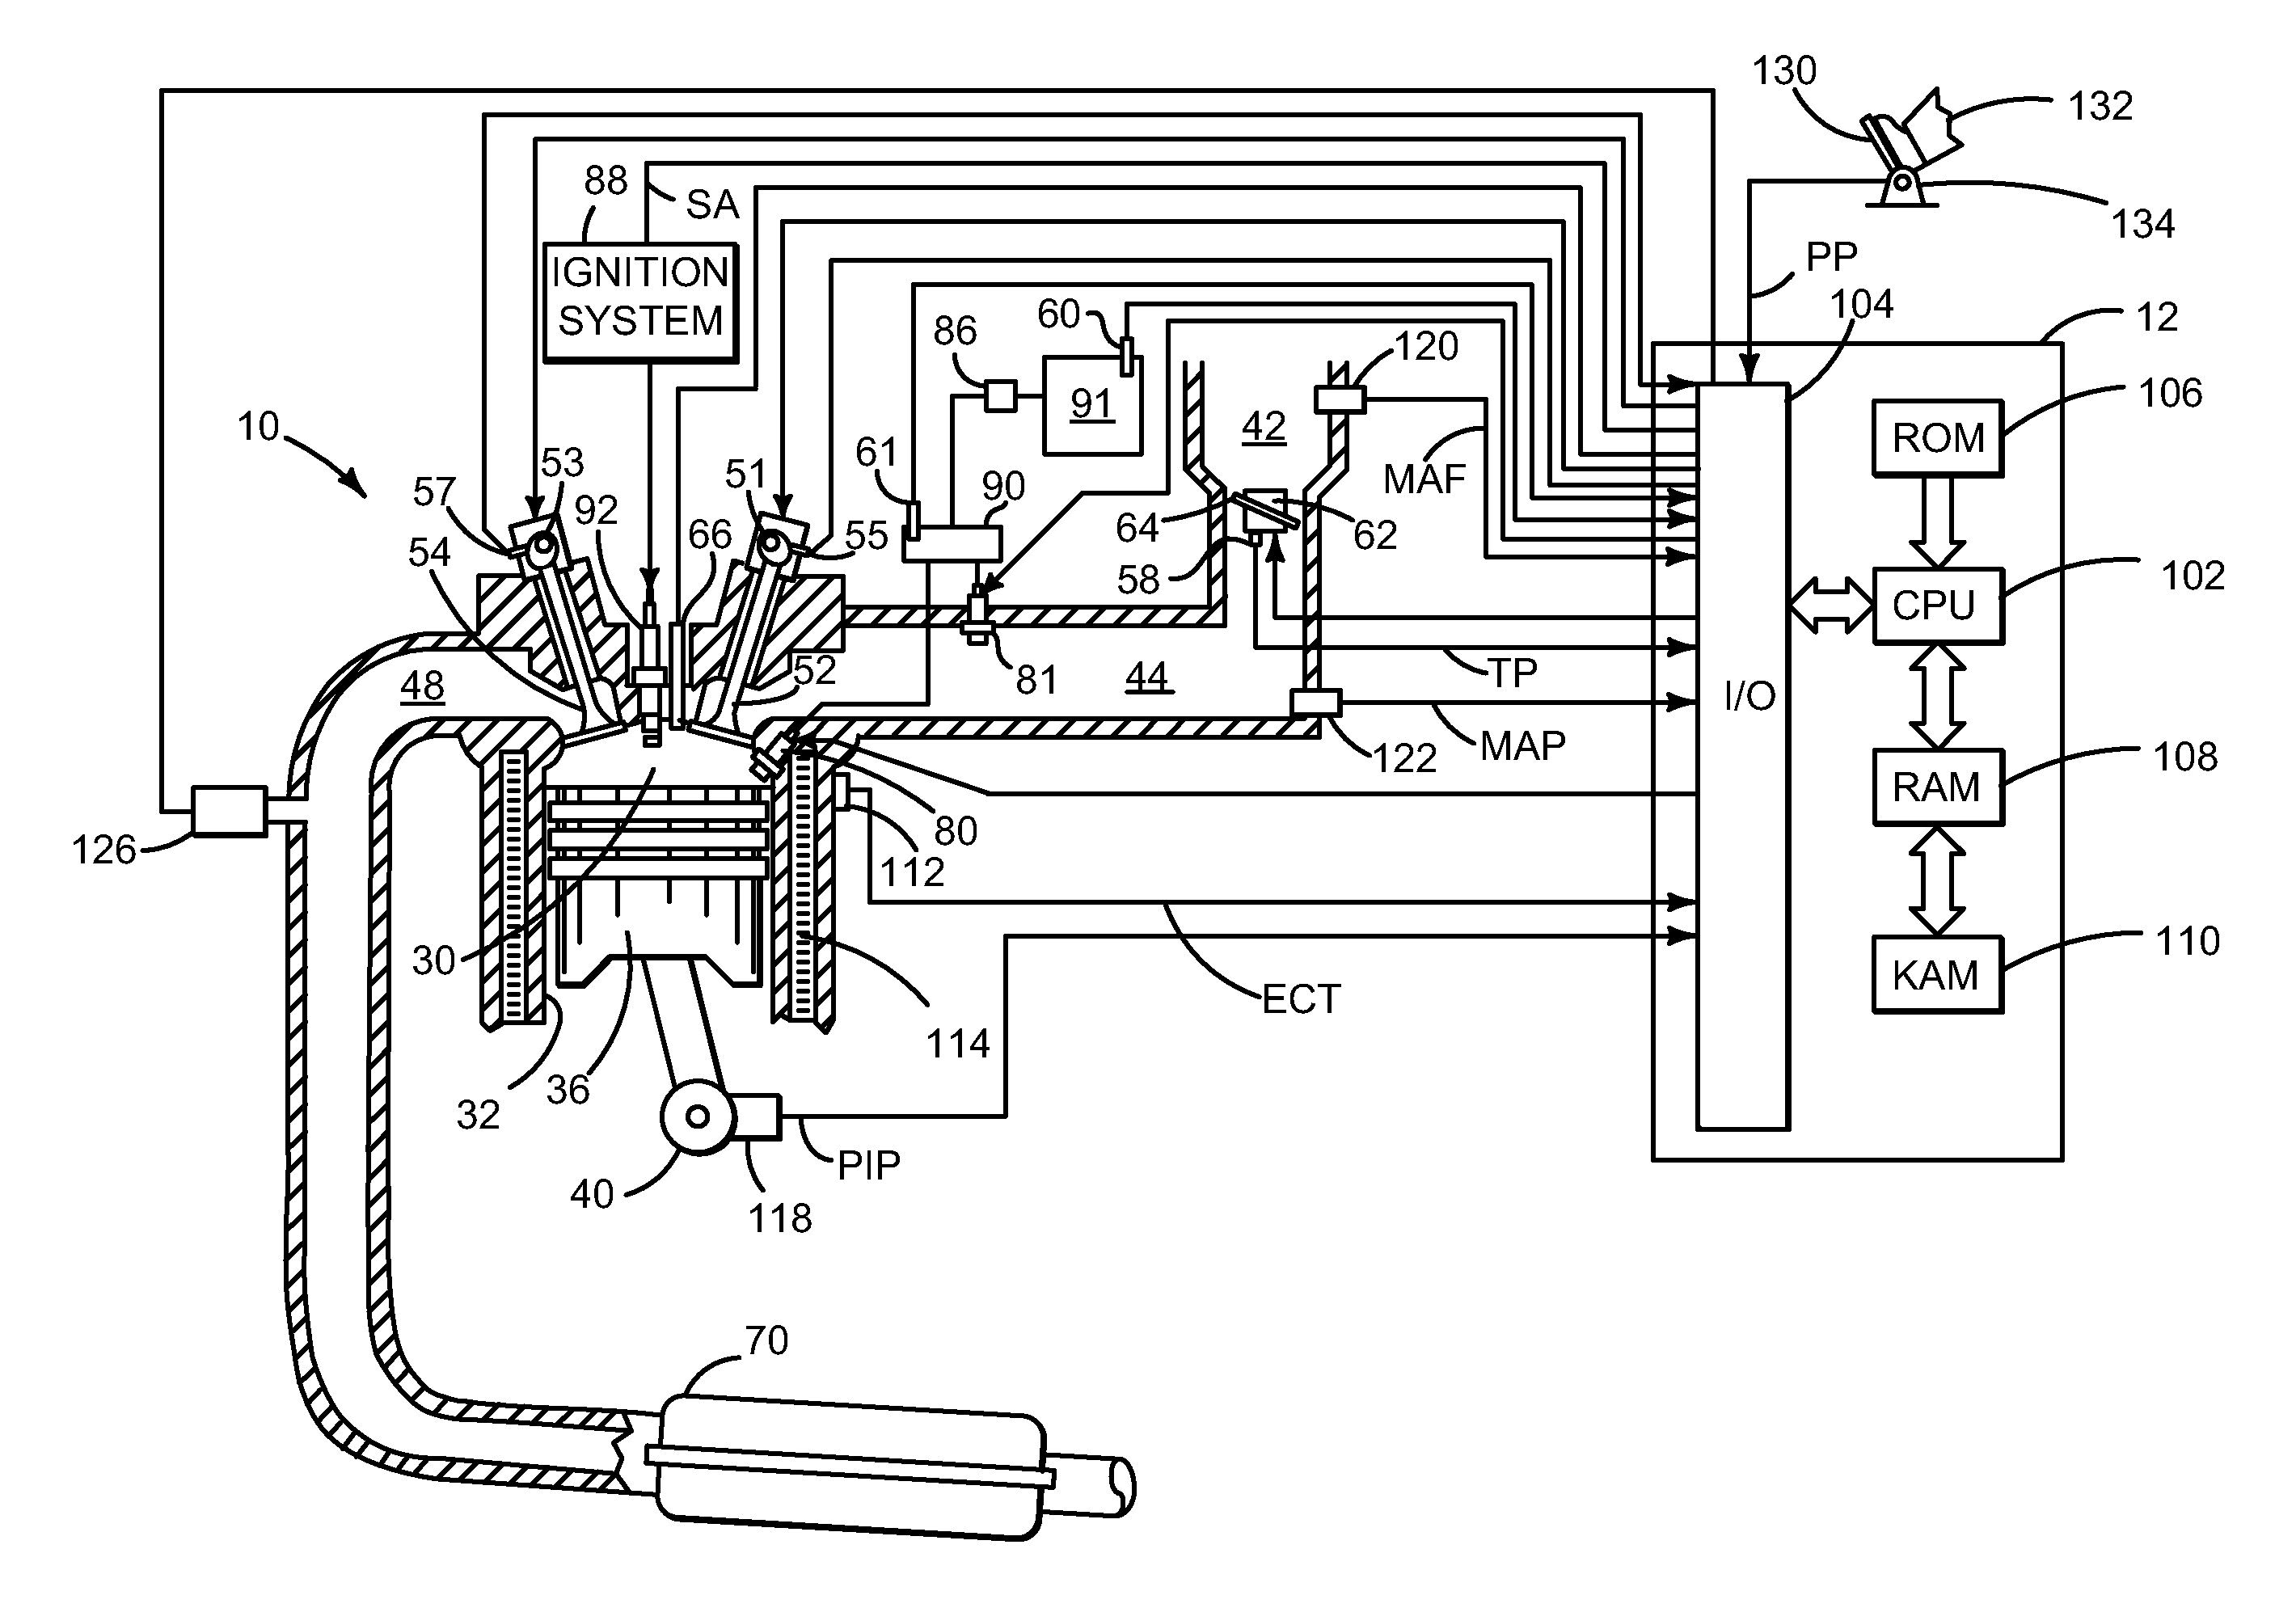 Enhanced fuel injection based on choke flow rate